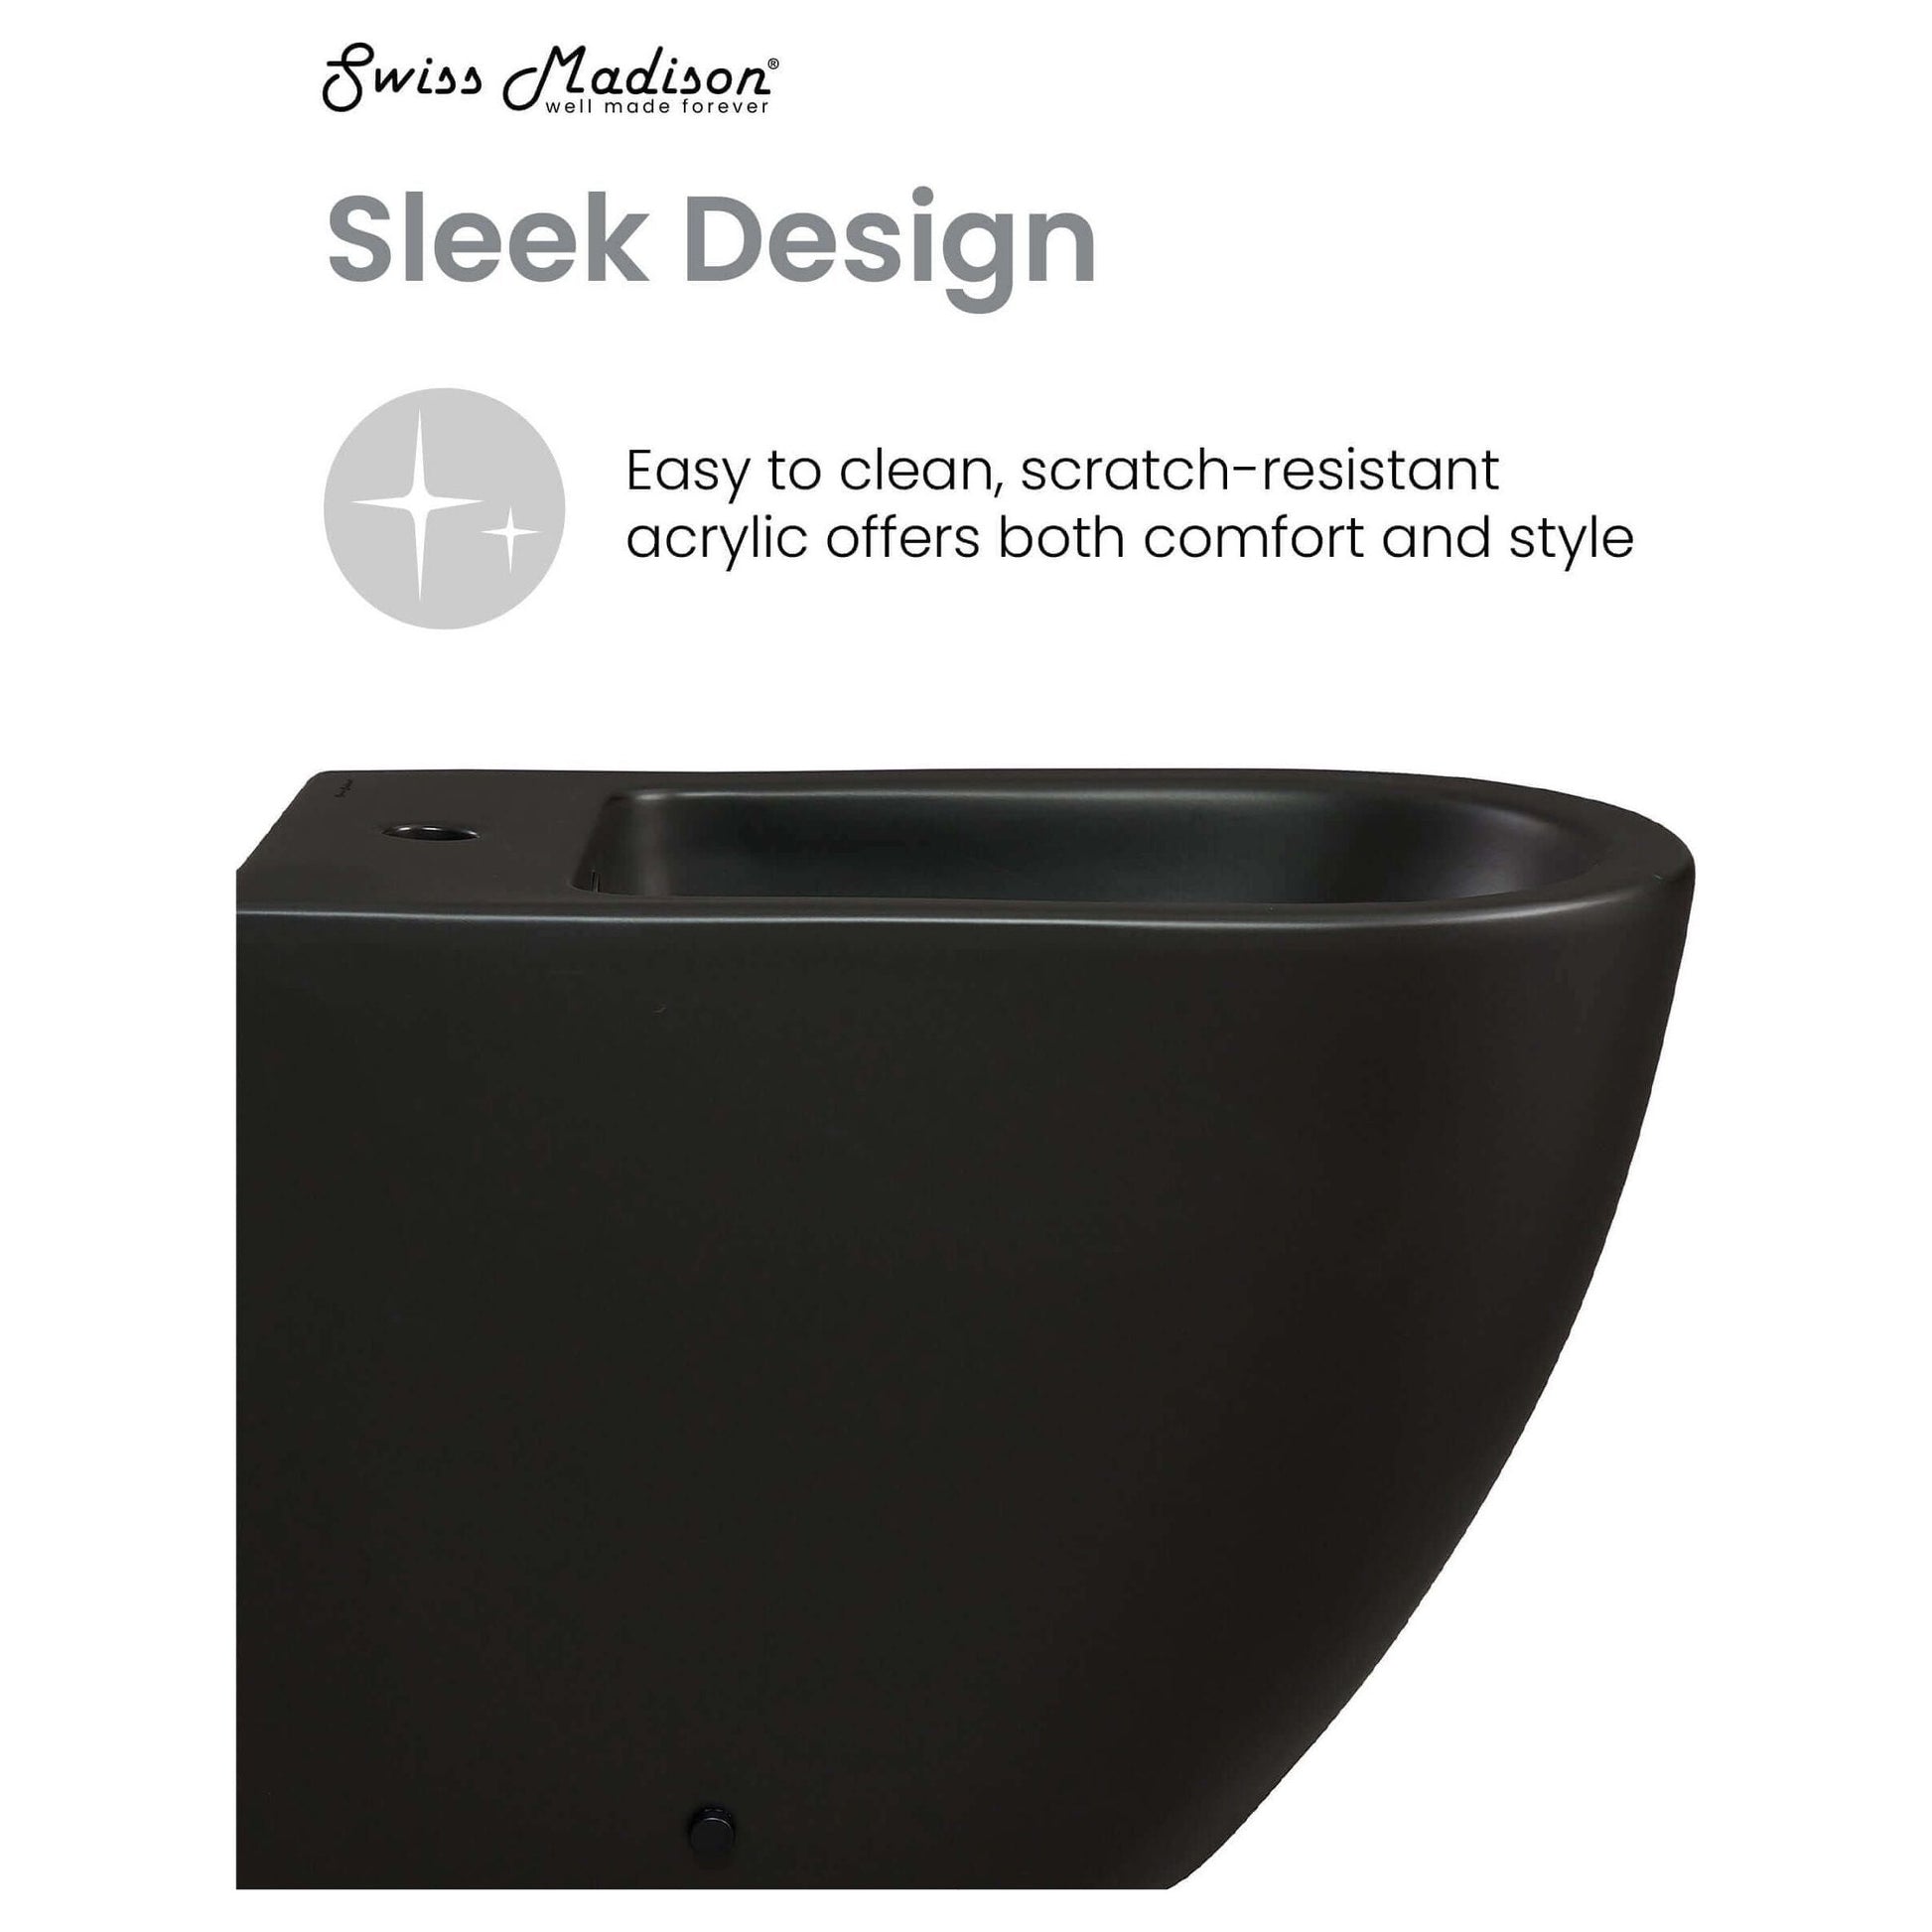 St. Tropez Bidet - side view in color black with features listed